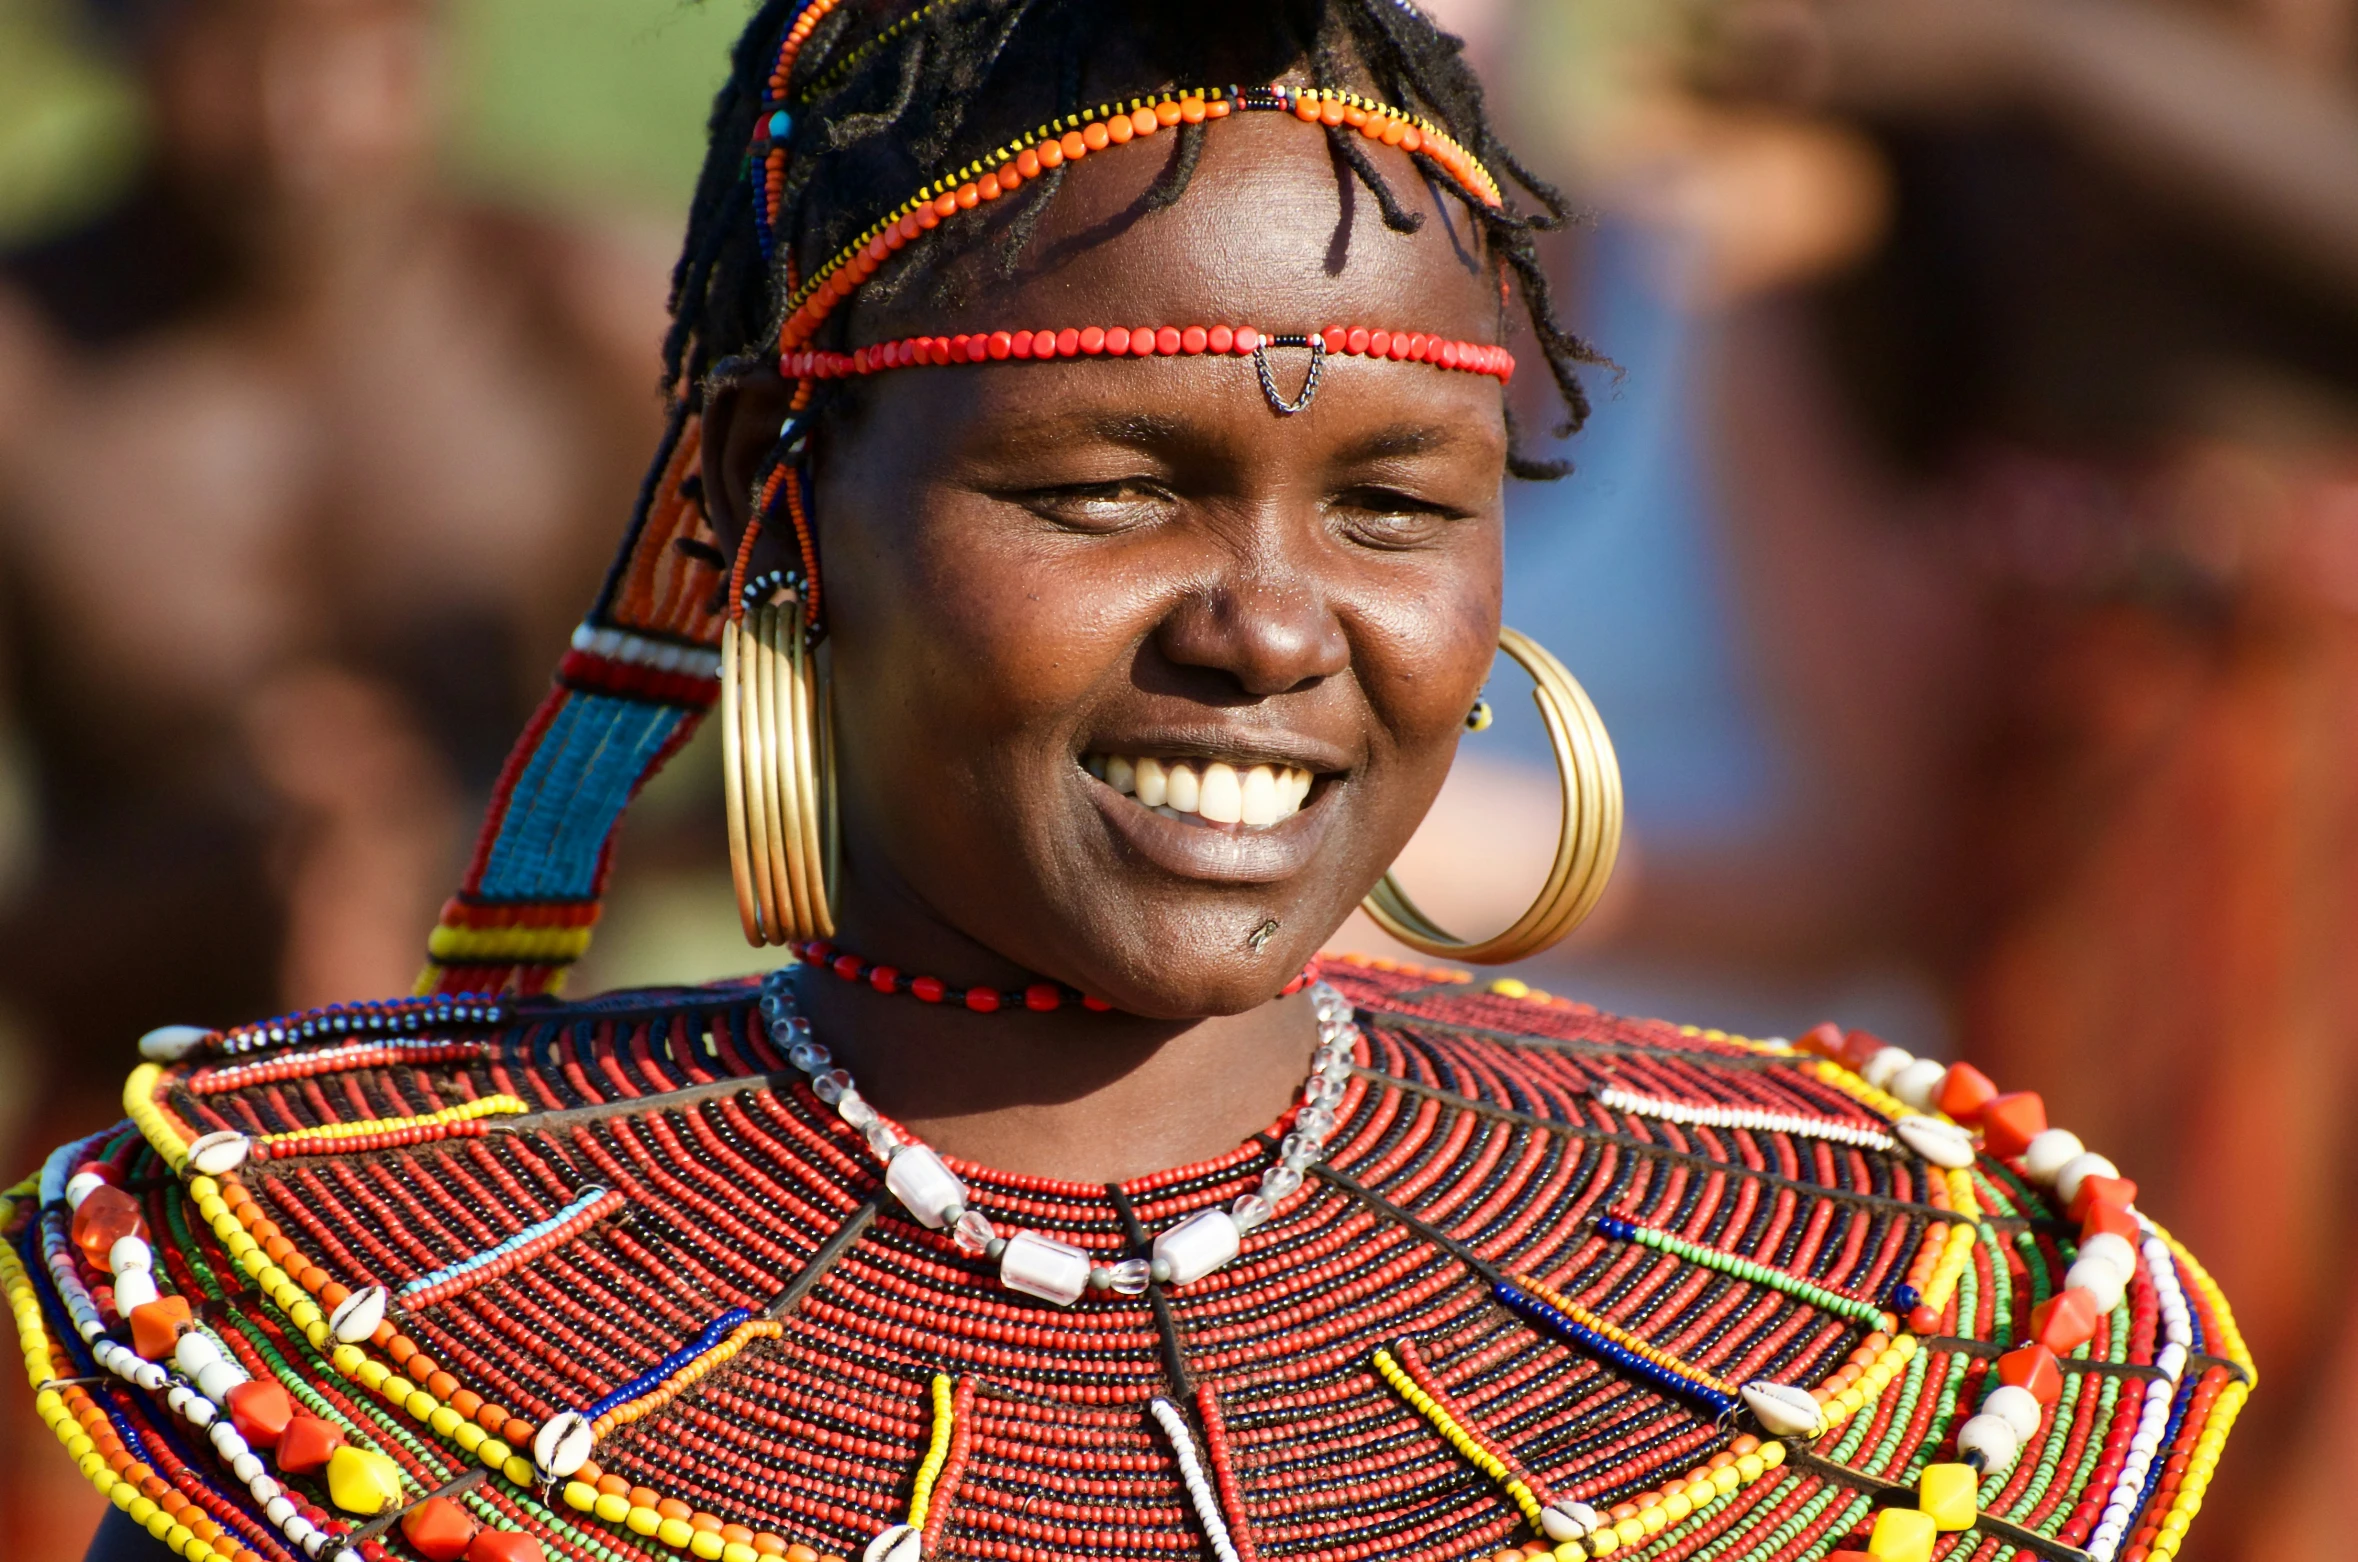 a woman wearing colorful necklaces smiles into the camera